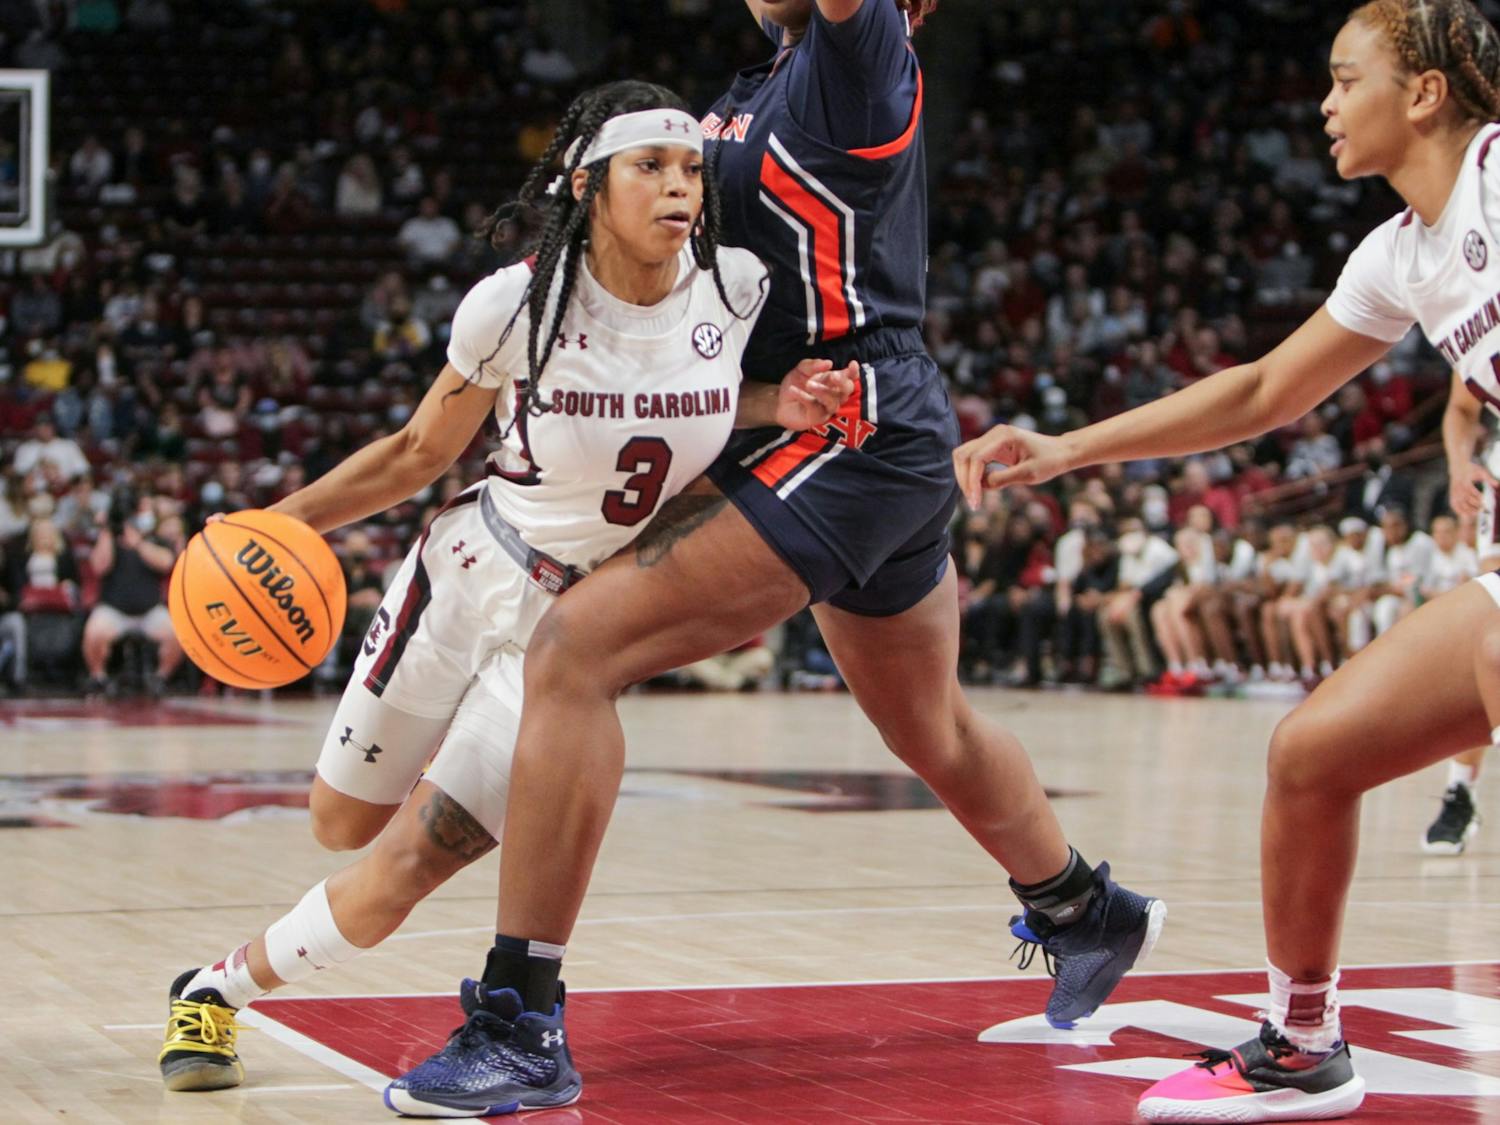 Senior guard Destanni Henderson works toward the basket during a game on Feb. 17, 2022 at Colonial Life Arena in Columbia, SC. The Gamecocks beat Auburn 75-38.